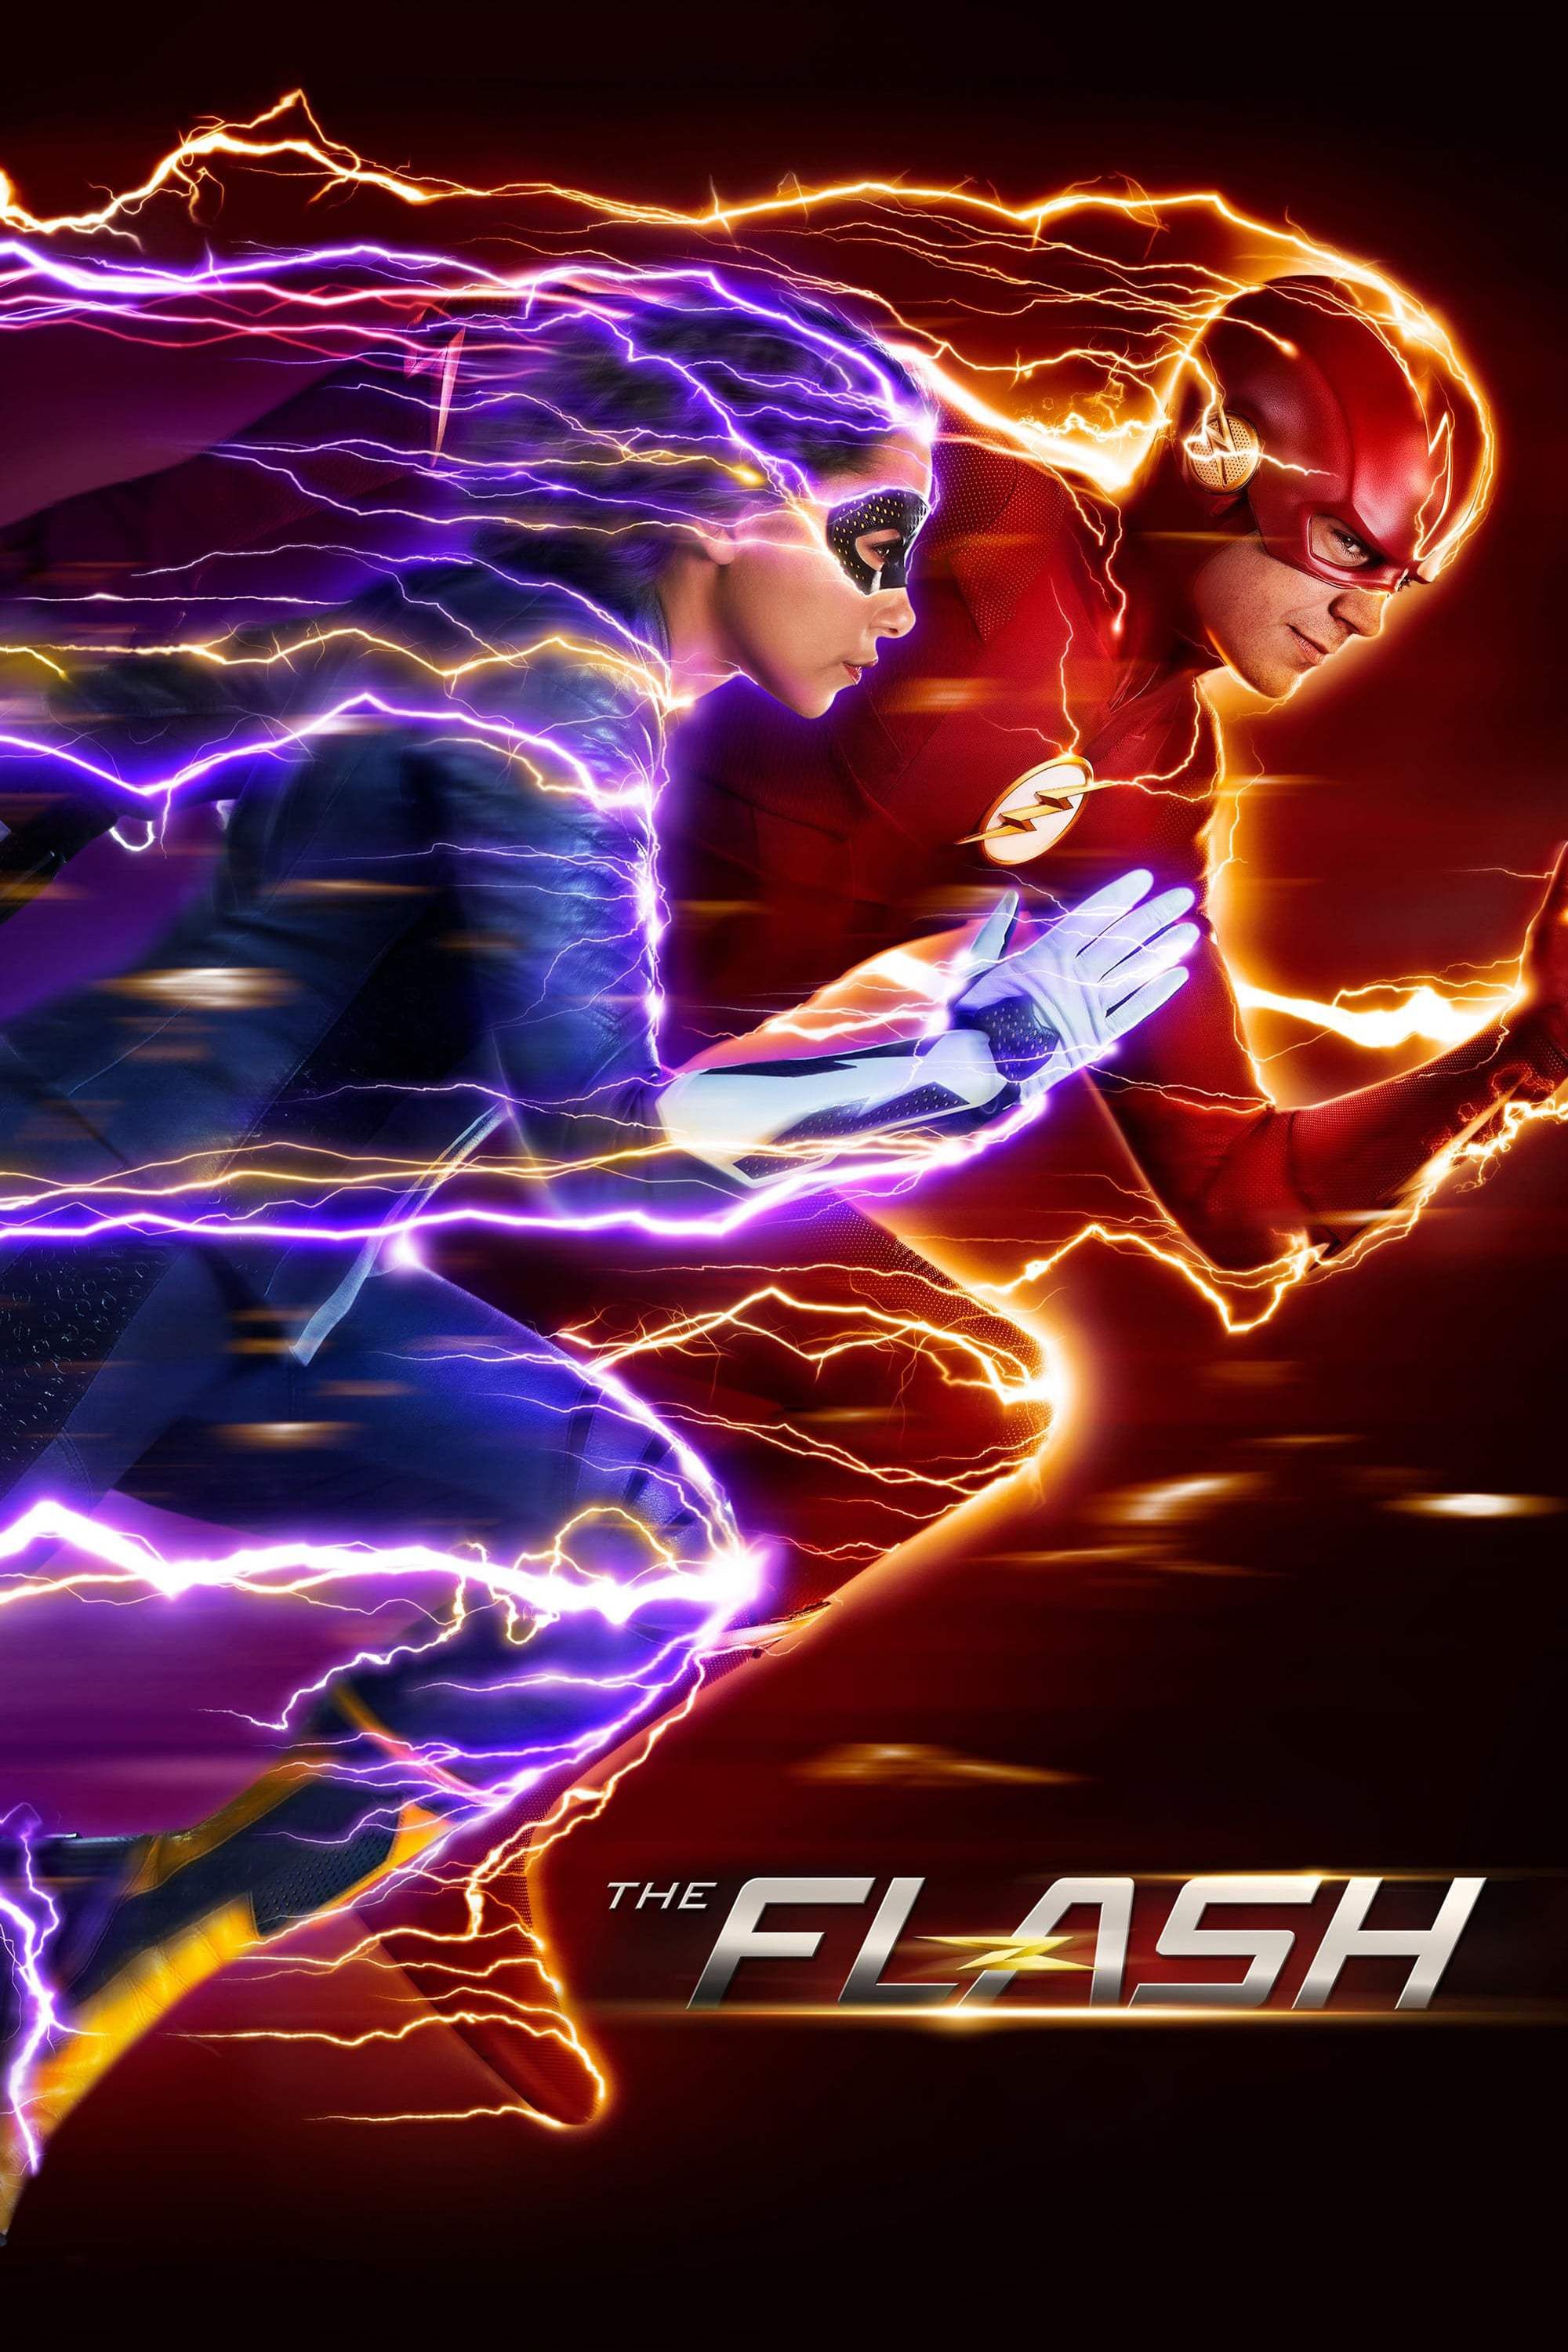 The Flash In Hindi Dubbed Watch Online